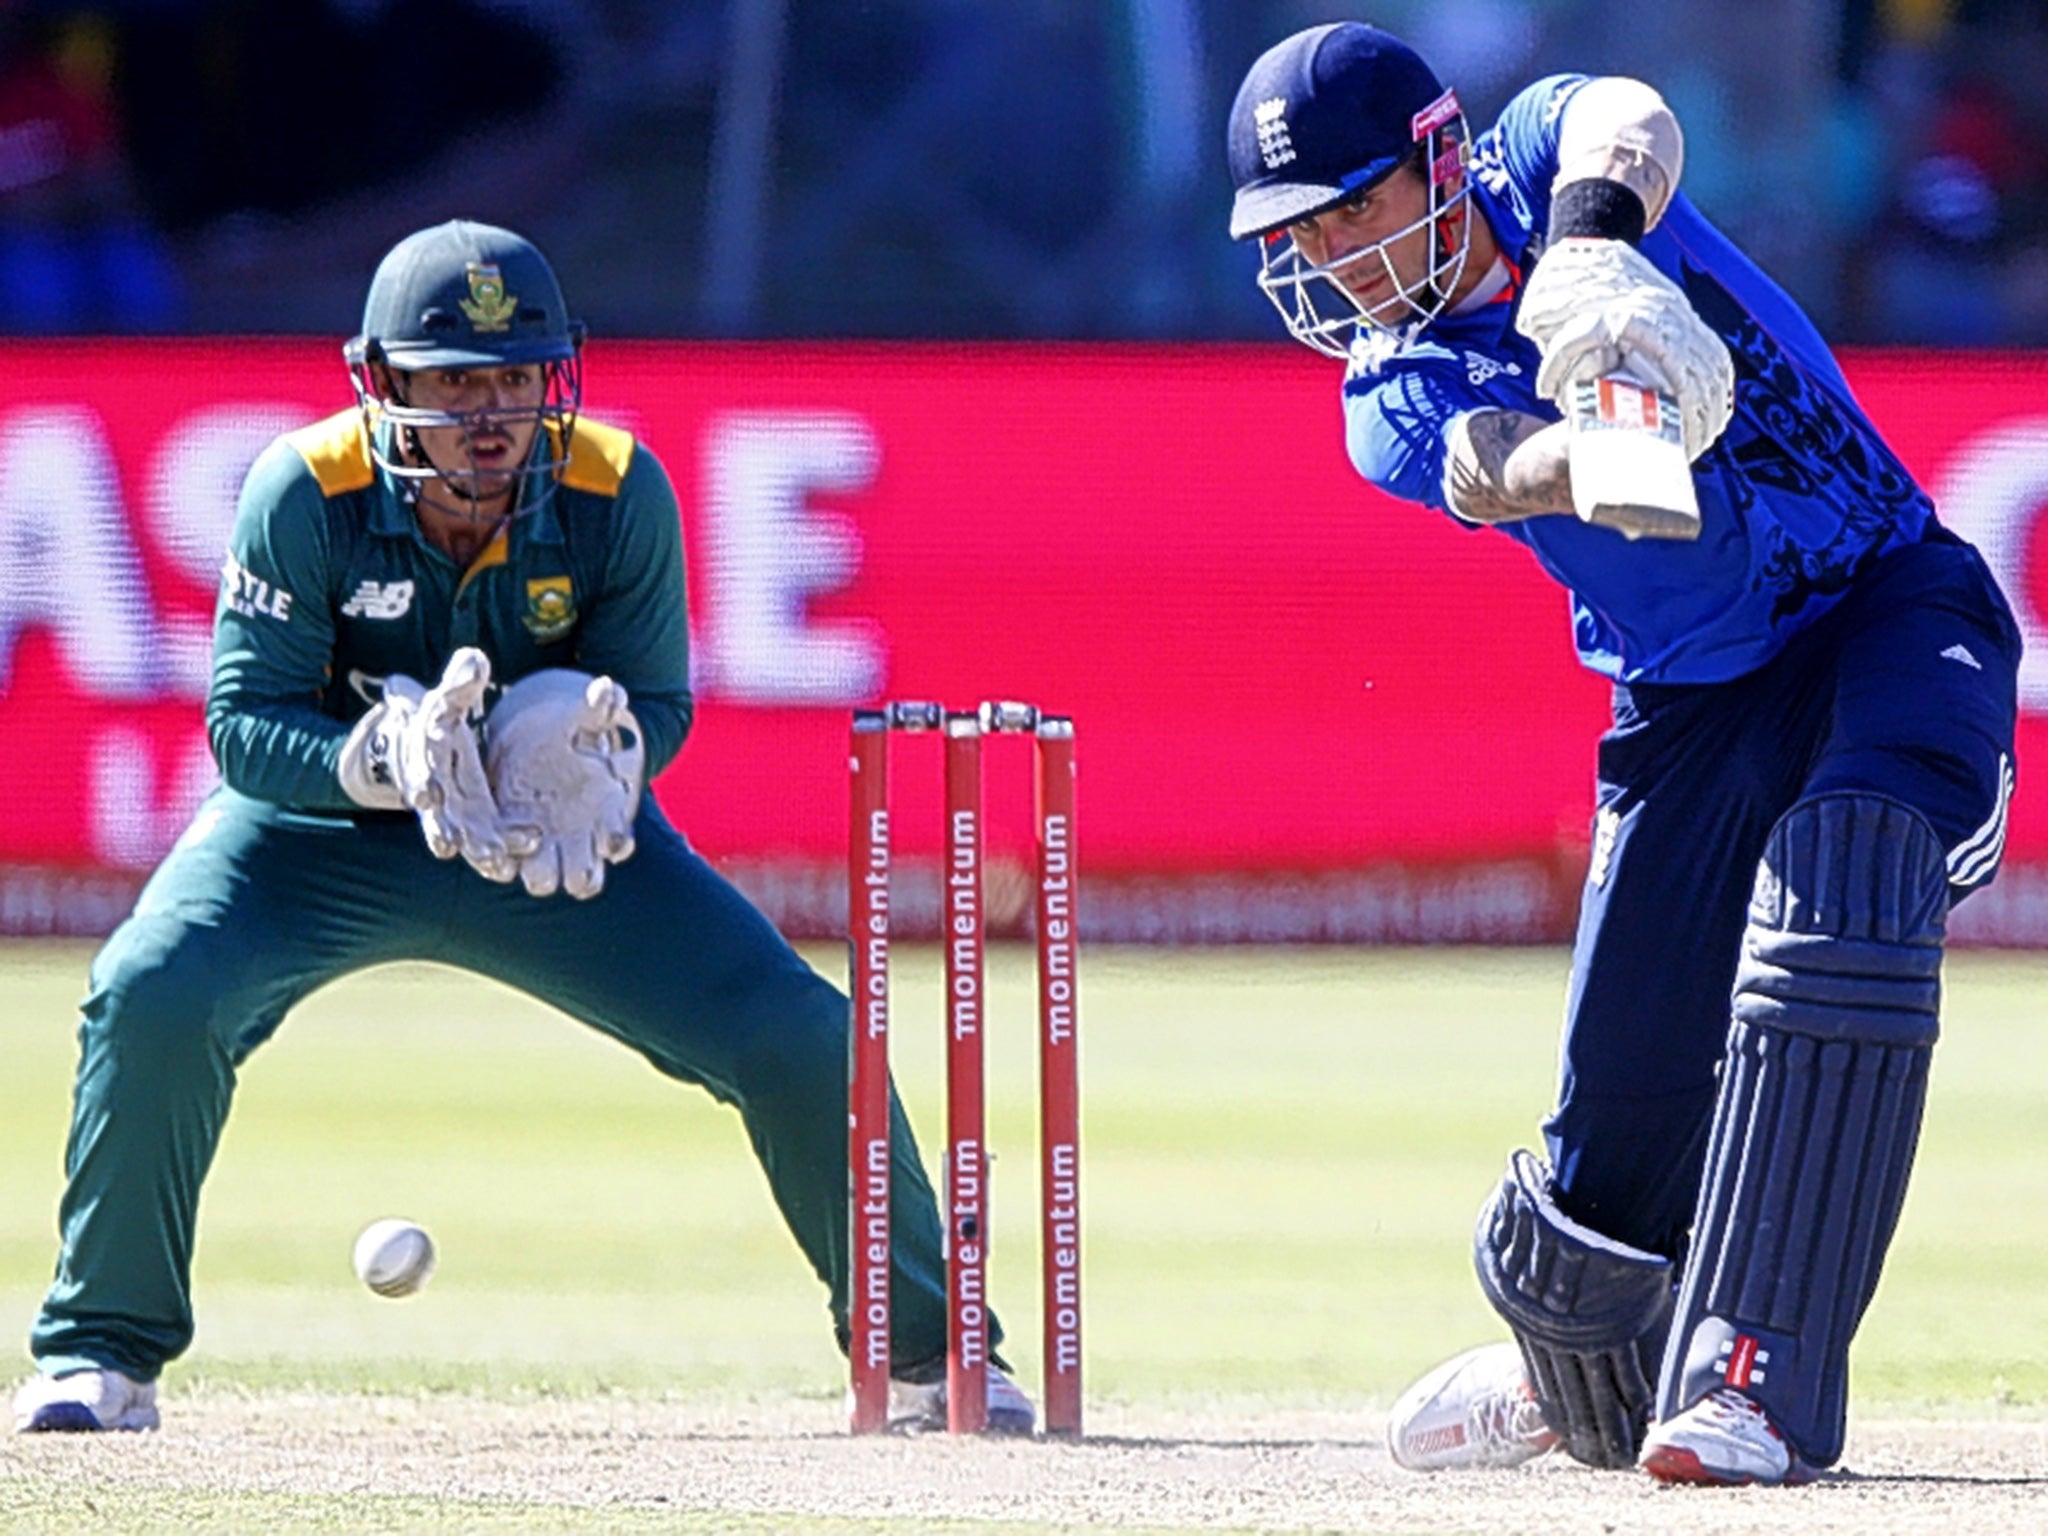 Alex Hales fell one short of a century against South Africa on Saturday